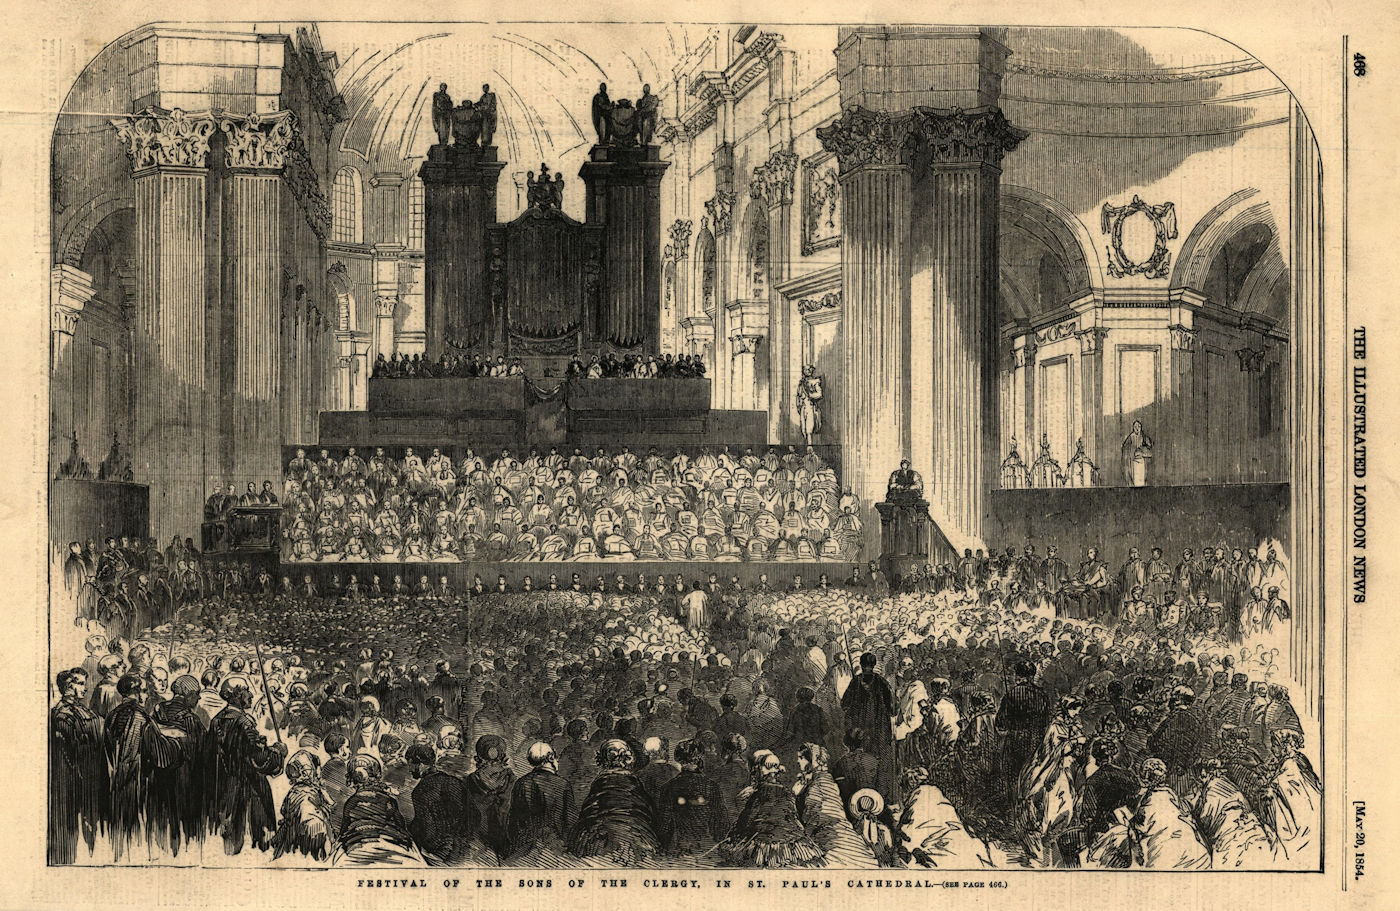 Festival of the sons of the clergy, in St. Paul's Cathedral. London 1854 print